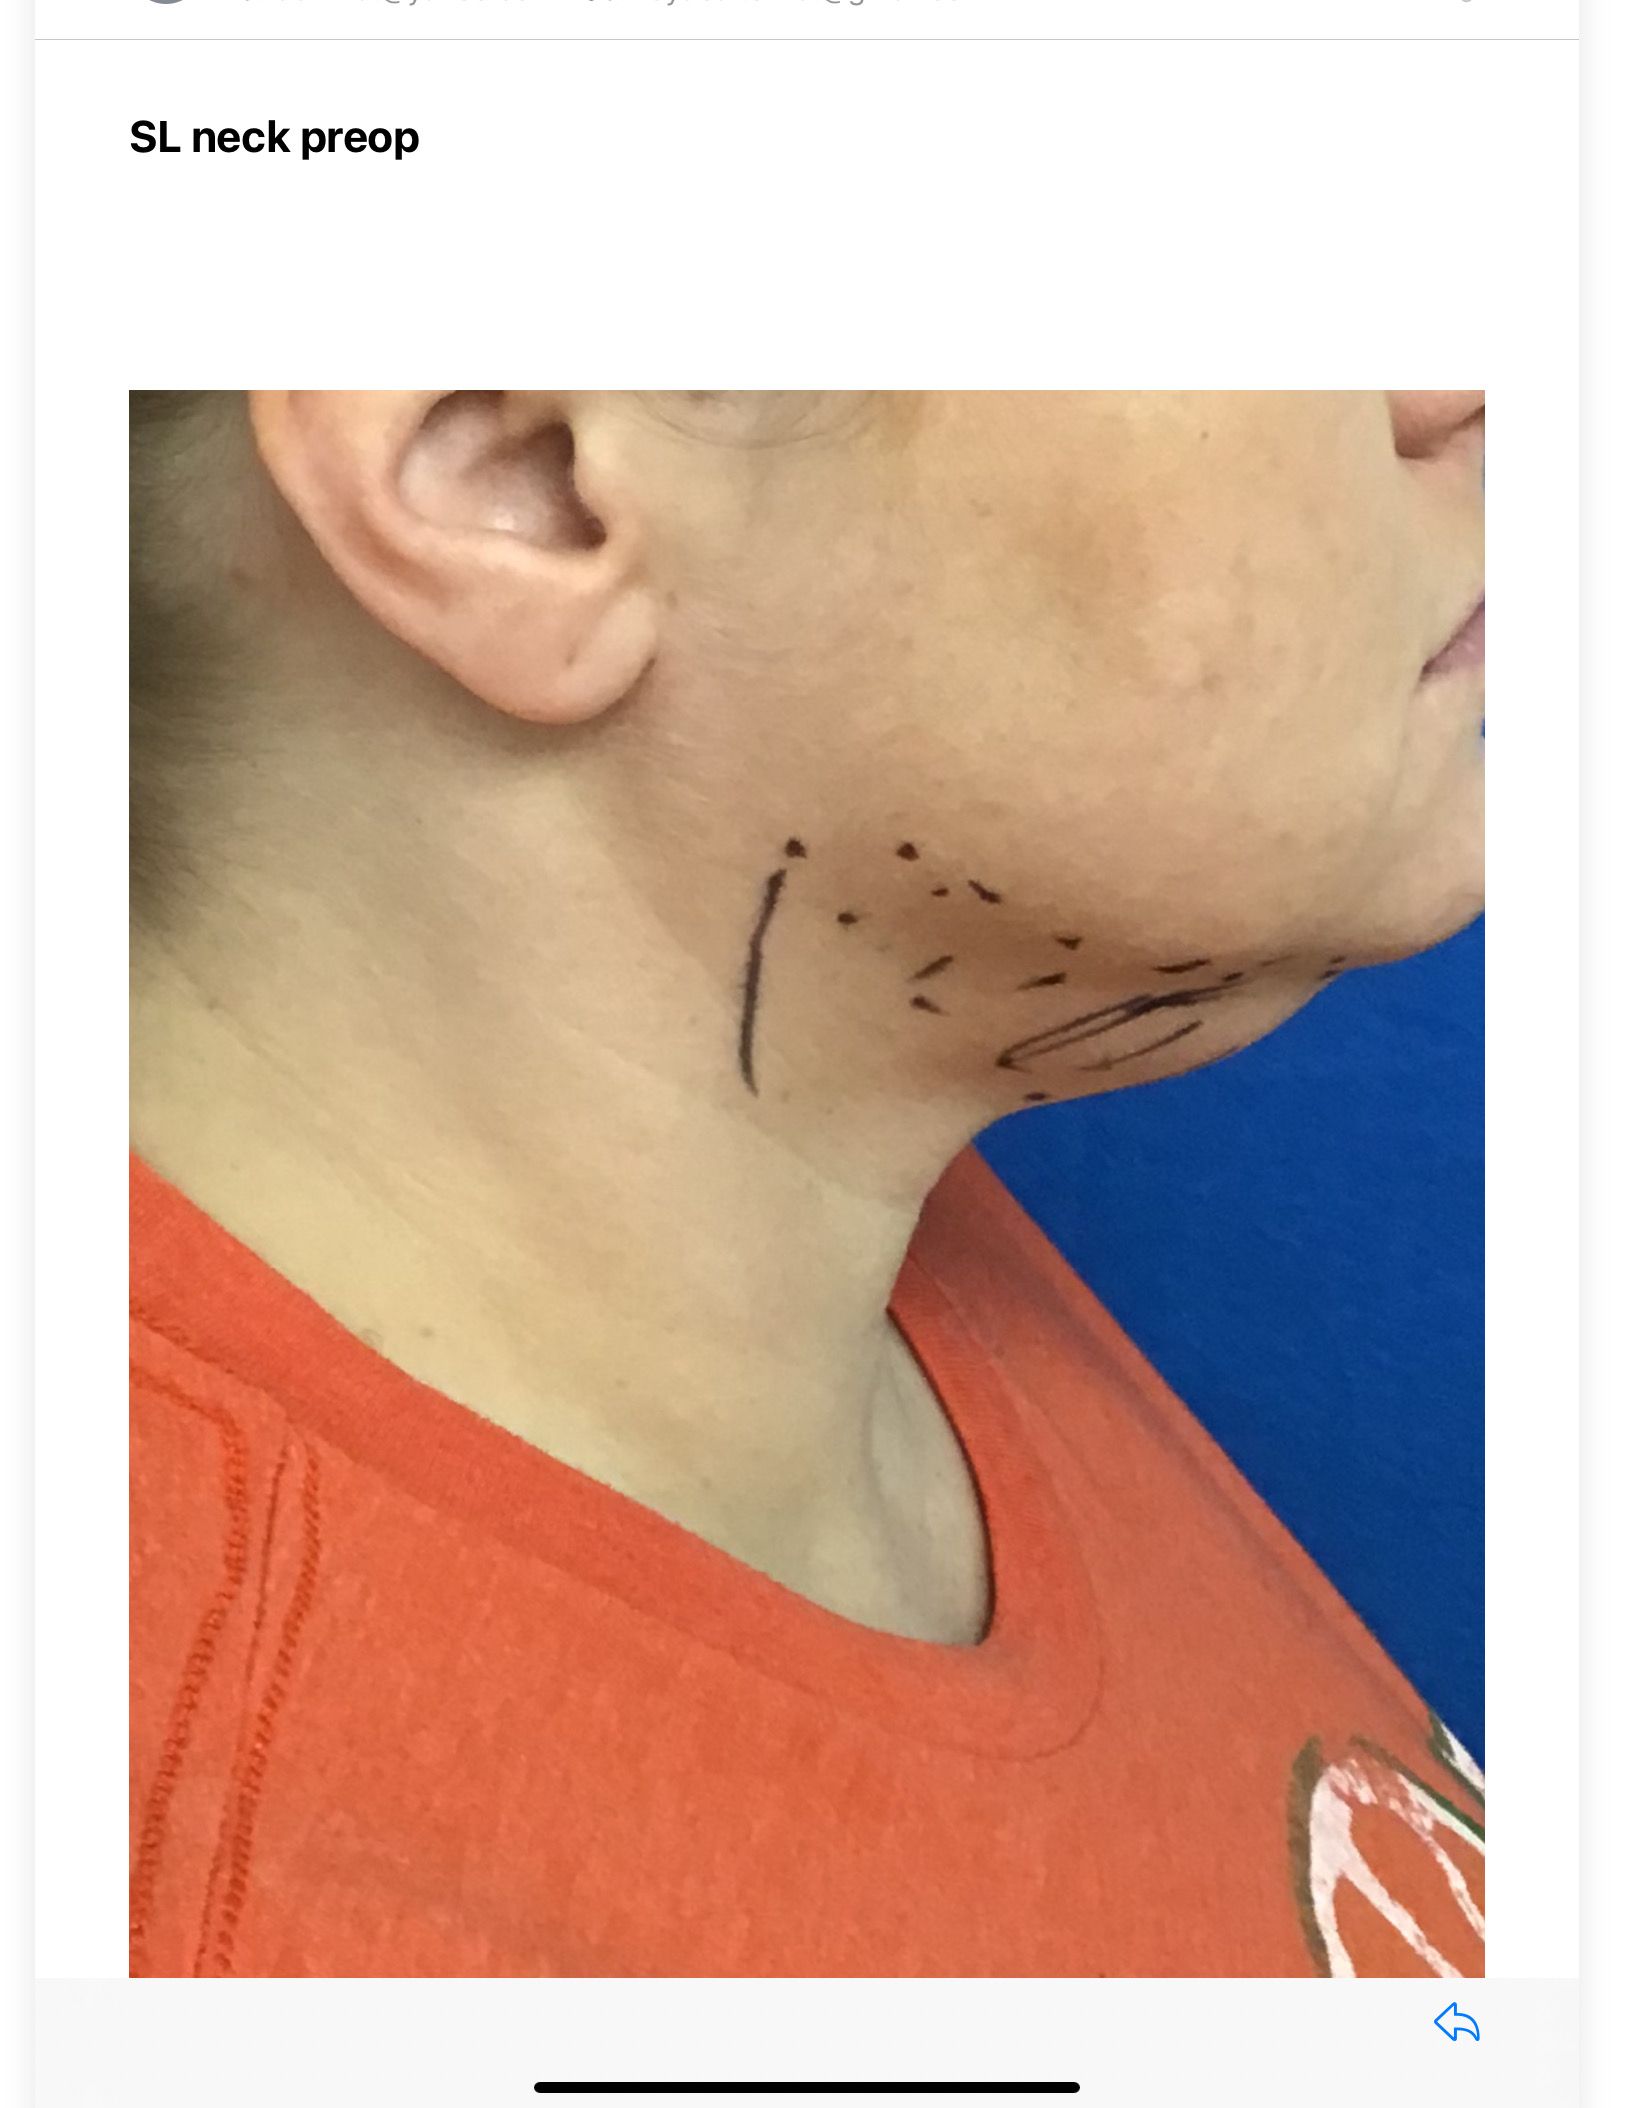 A picture of a woman 's neck with lines drawn on it